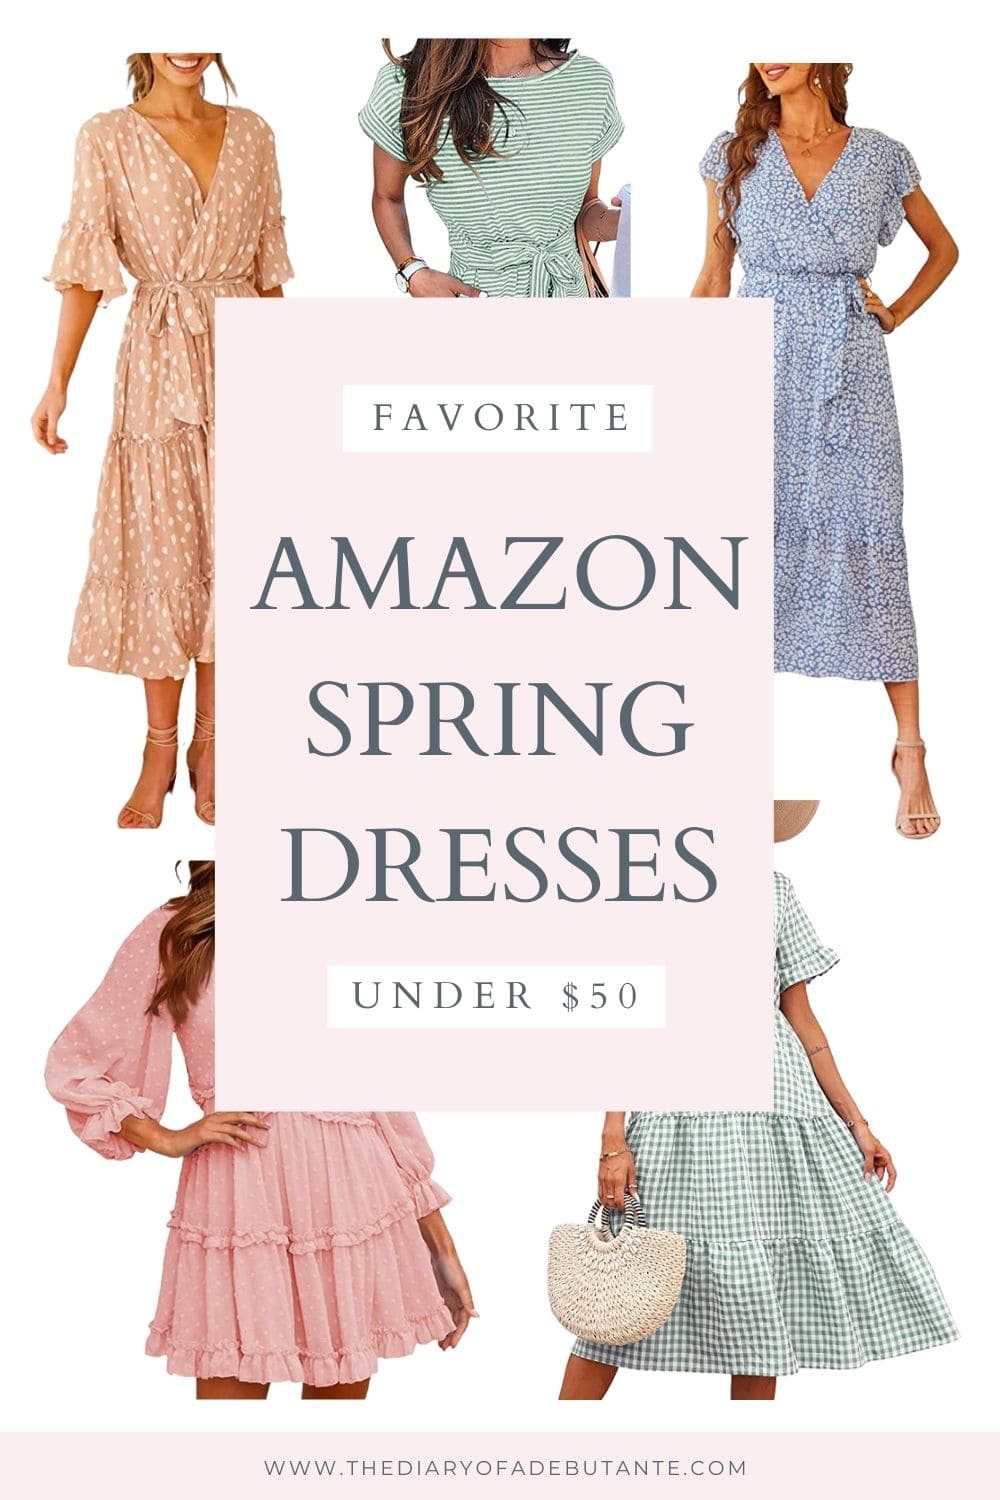 Affordable fashion blogger Stephanie Ziajka rounds up cute spring dresses under $50 on Amazon on Diary of a Debutante